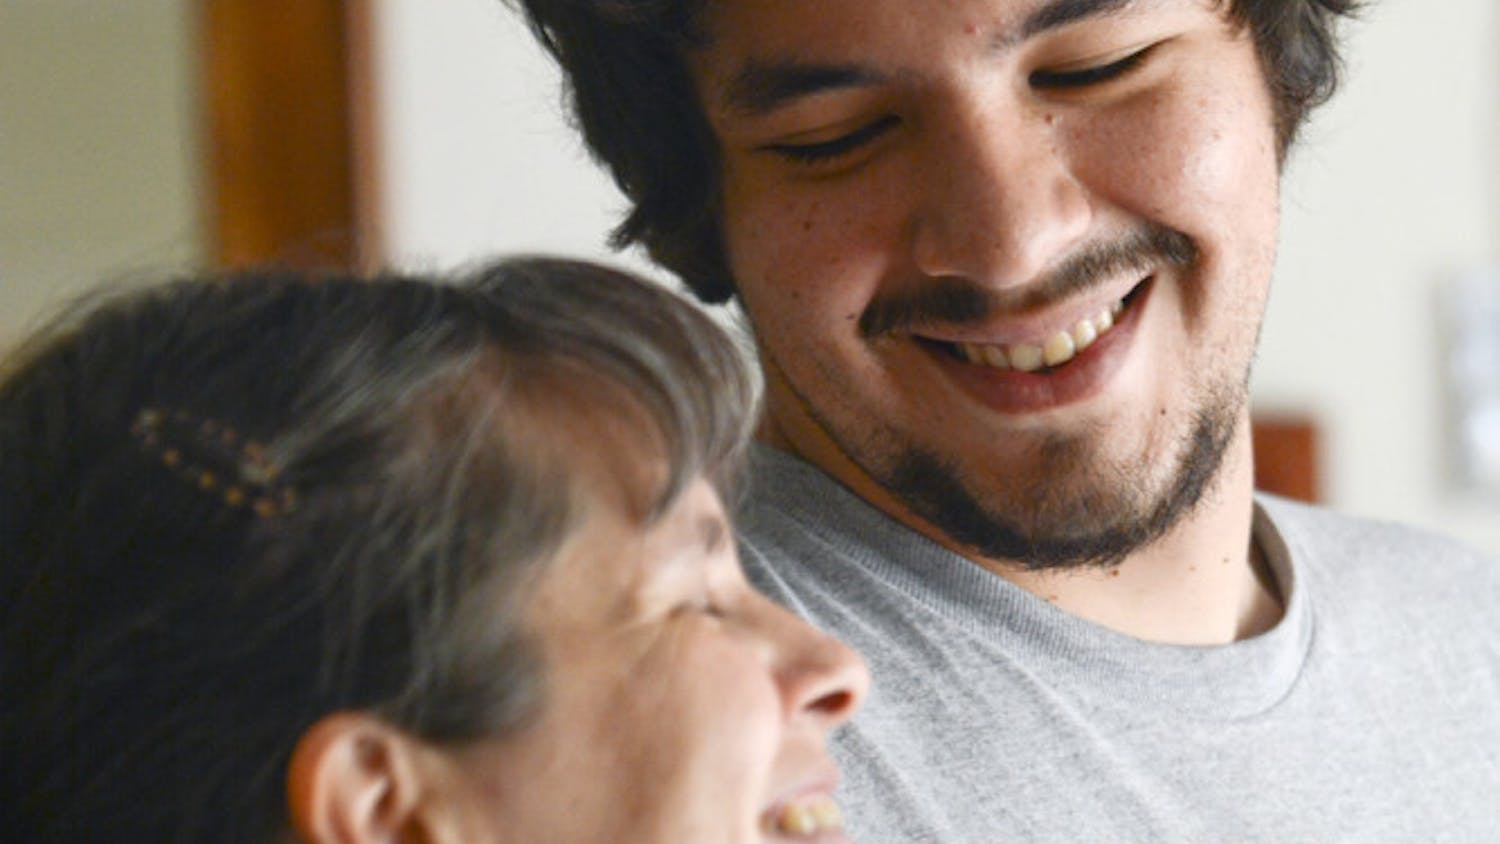 Claudia Castagliola, 45, laughs with her eldest son, Cristobal Gonzalez, 23, in her home’s living room. The two will graduate from a PhD program and a Master’s program, respectively, this week.